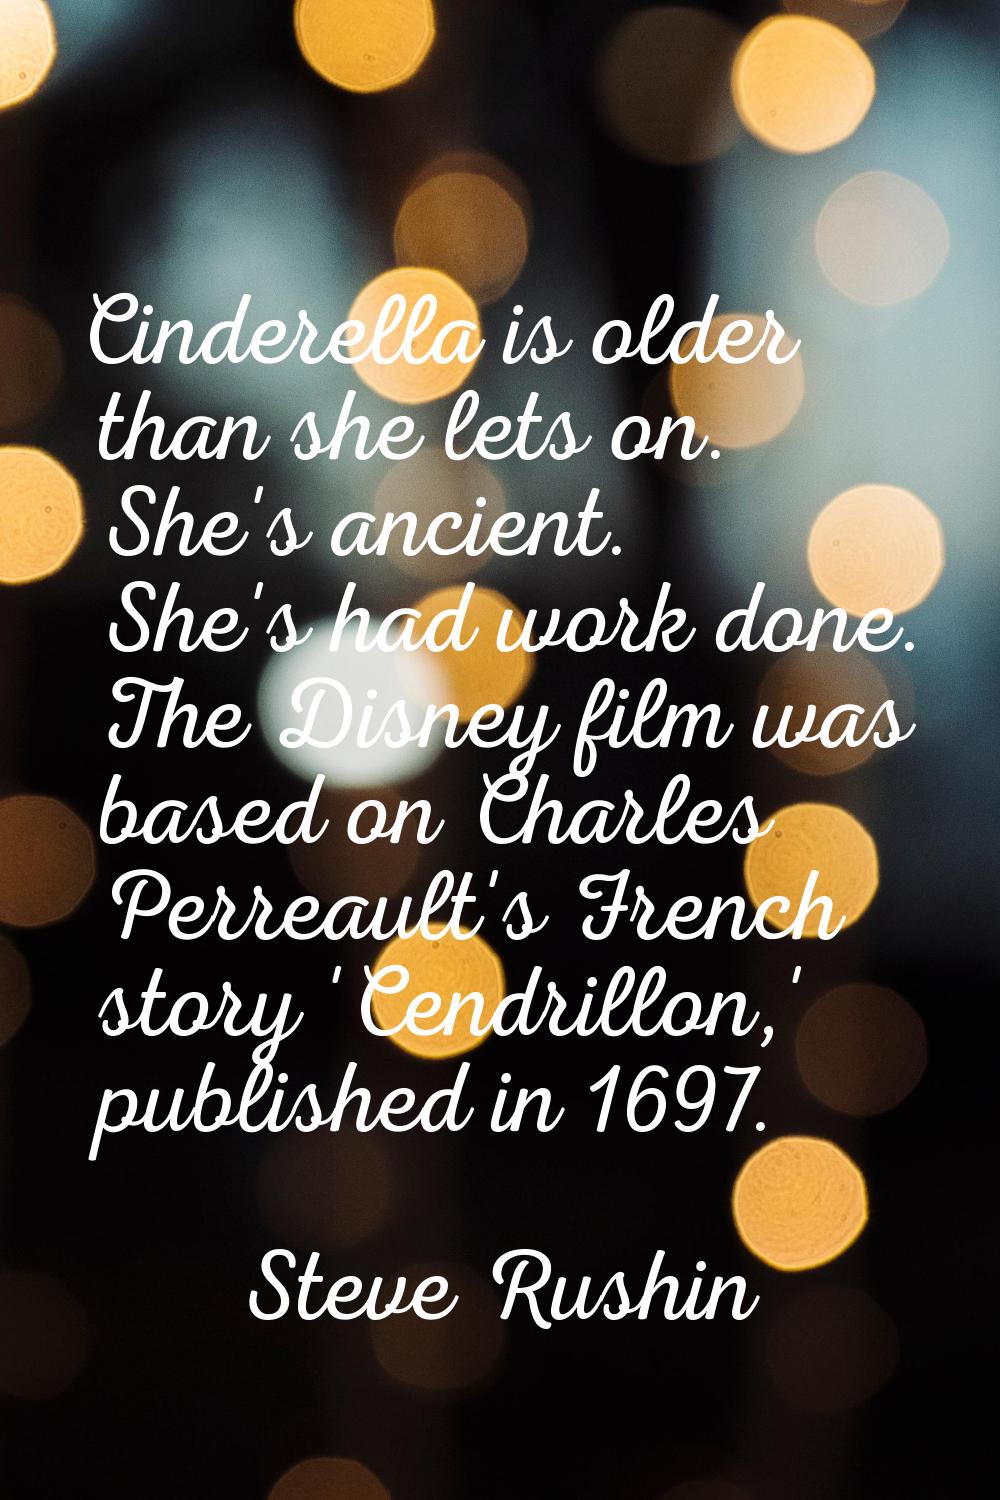 Cinderella is older than she lets on. She's ancient. She's had work done. The Disney film was based